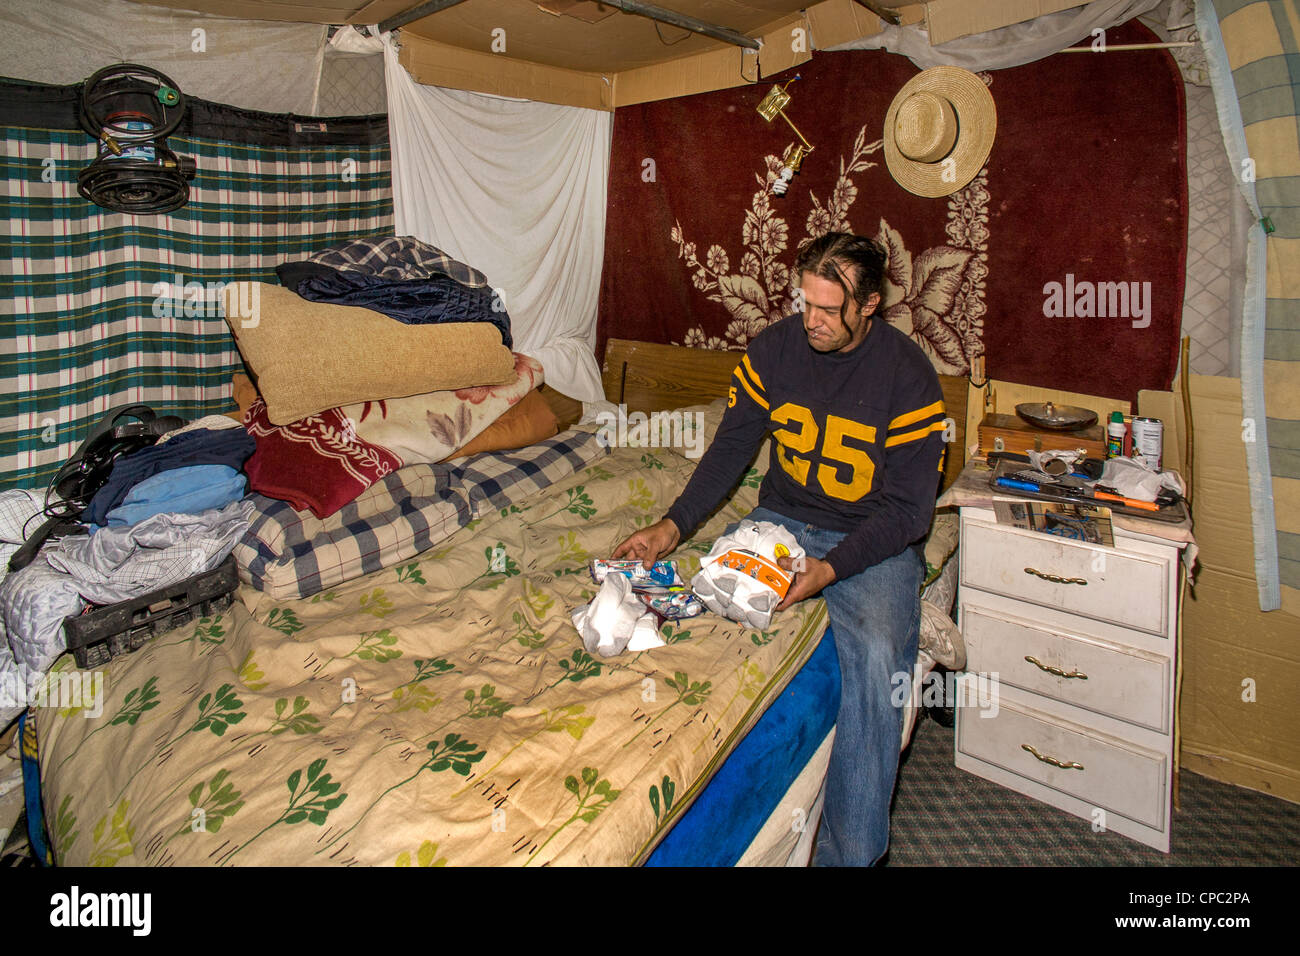 Veteran sits in makeshift shelter in a primitive outdoor encampment in a desert town in California. Stock Photo